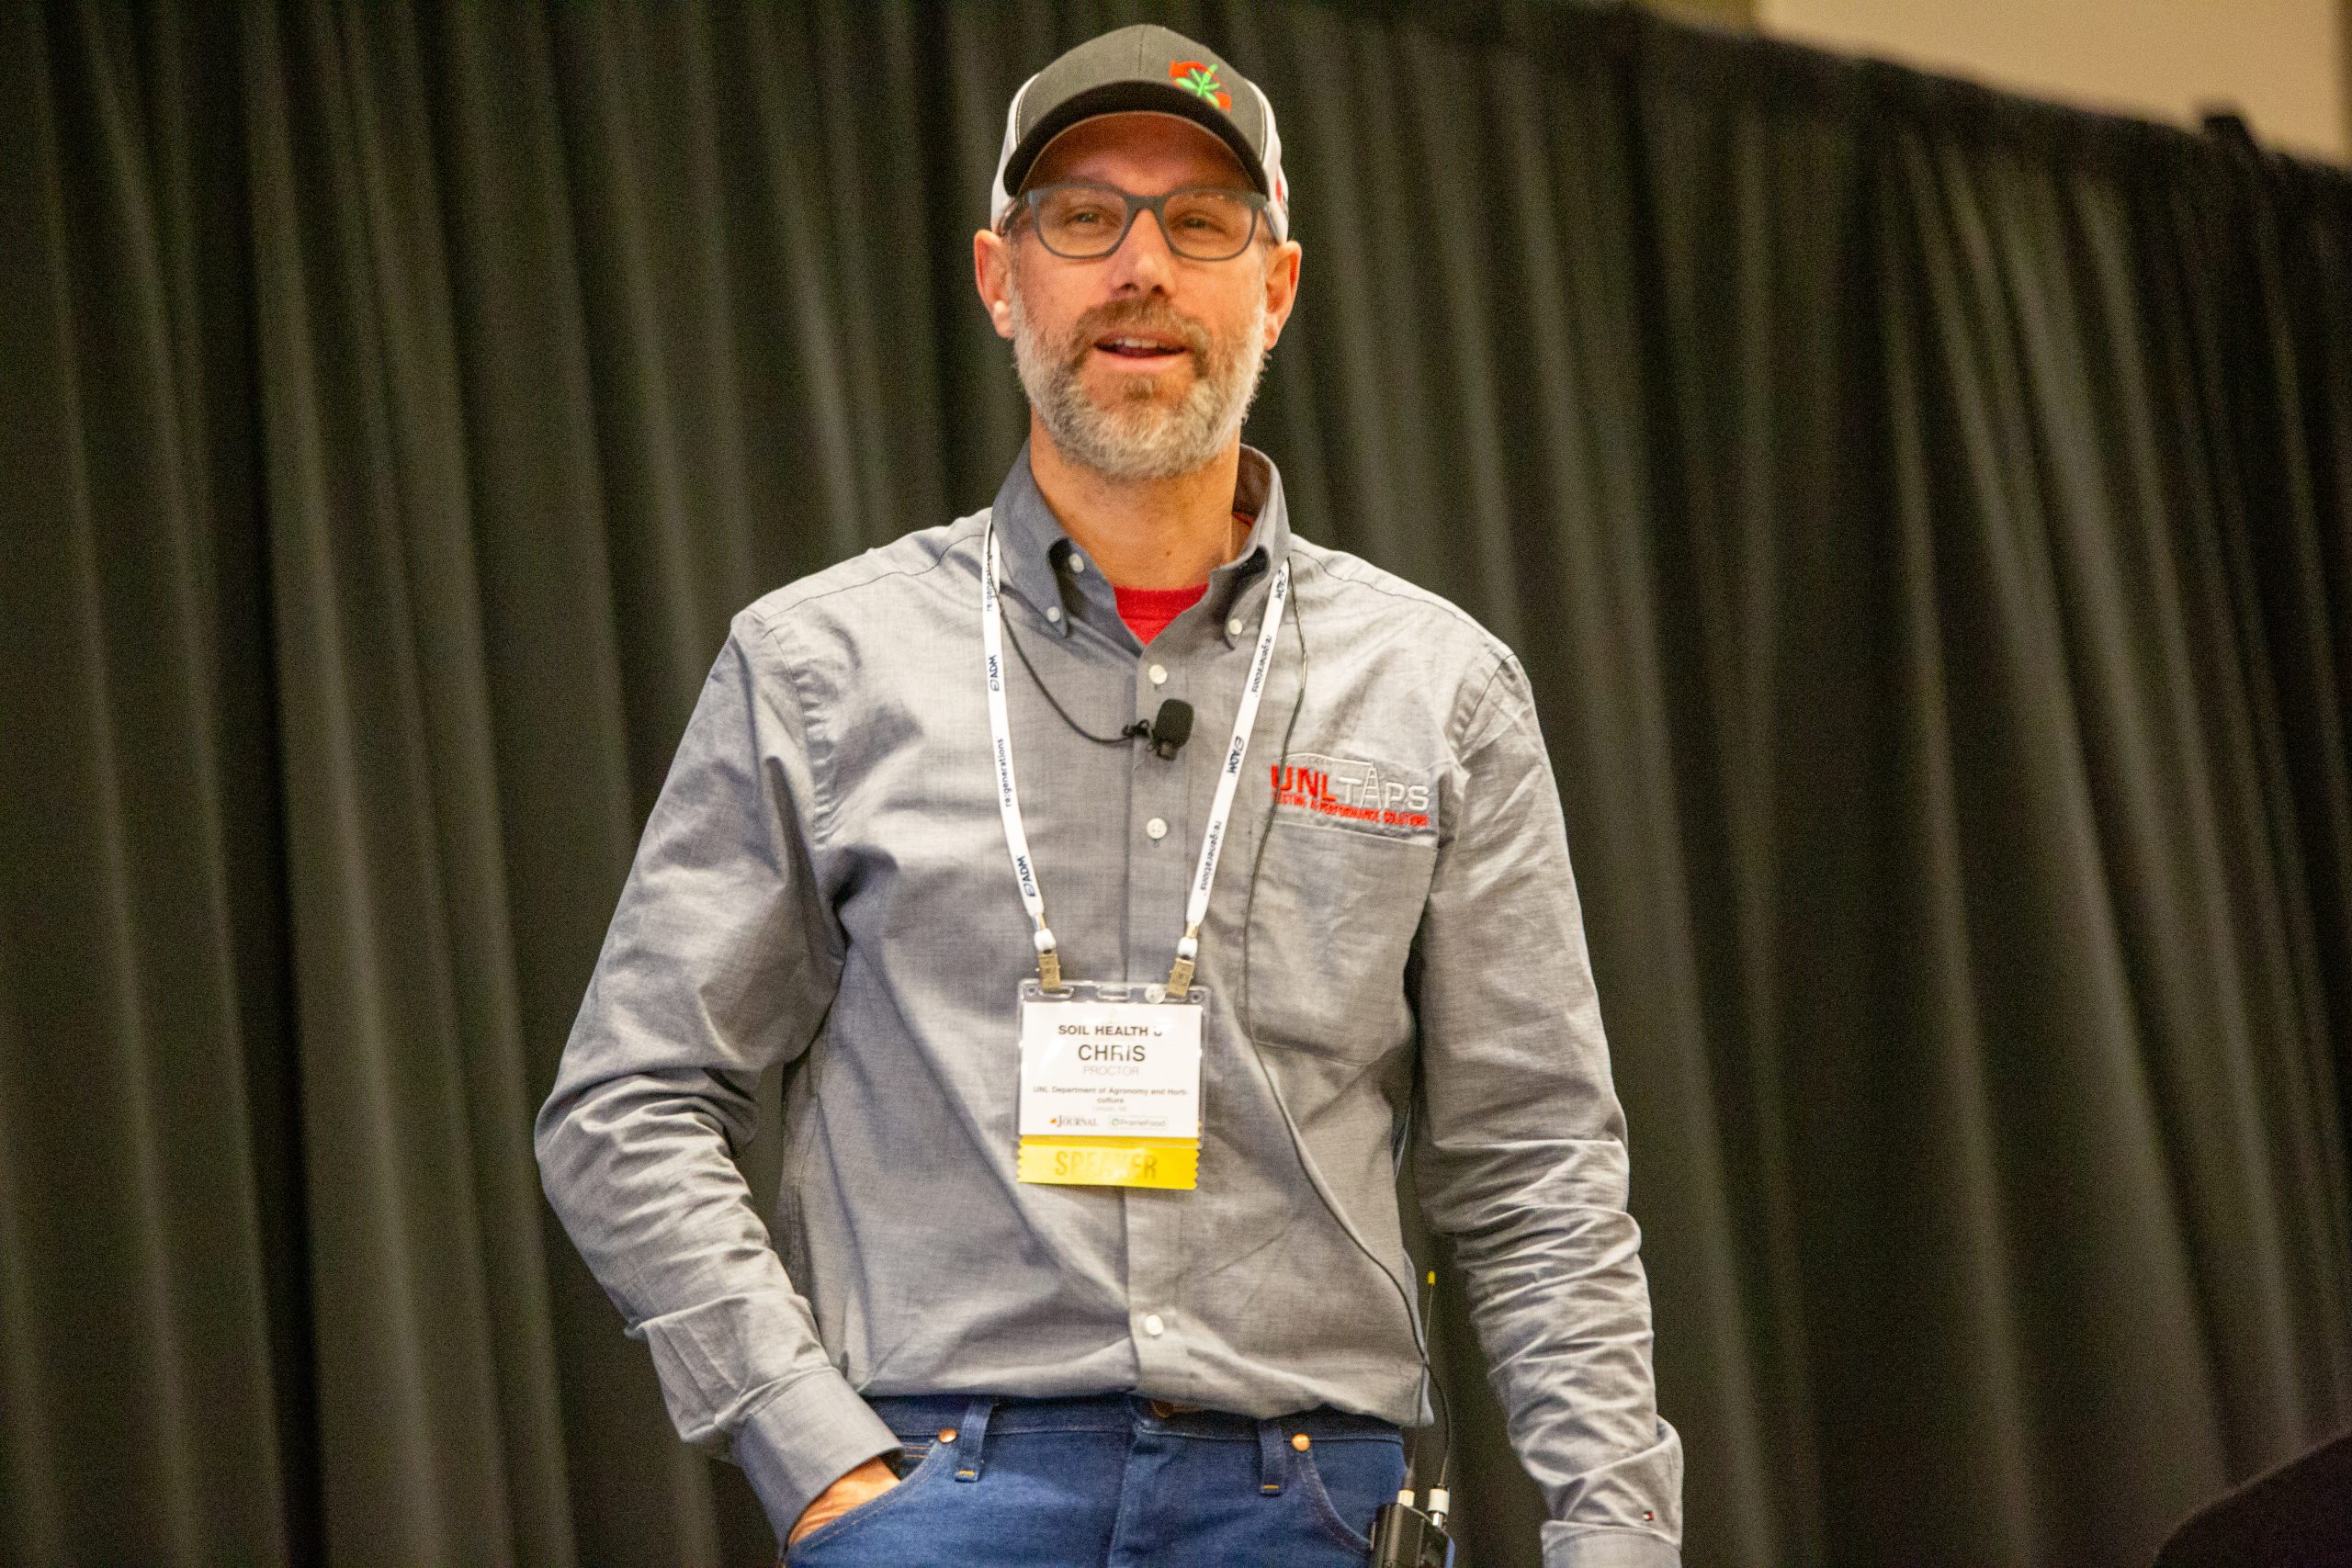 Chris Proctor, weed management Extension educator with the University of Nebraska-Lincoln, discussed Using cover crops as an IPM tool for managing hard-to-control weeds in no-till cropping systems at Soil Health U, Jan. 18 in Salina, Kansas. (Journal photo by Kylene Scott.)